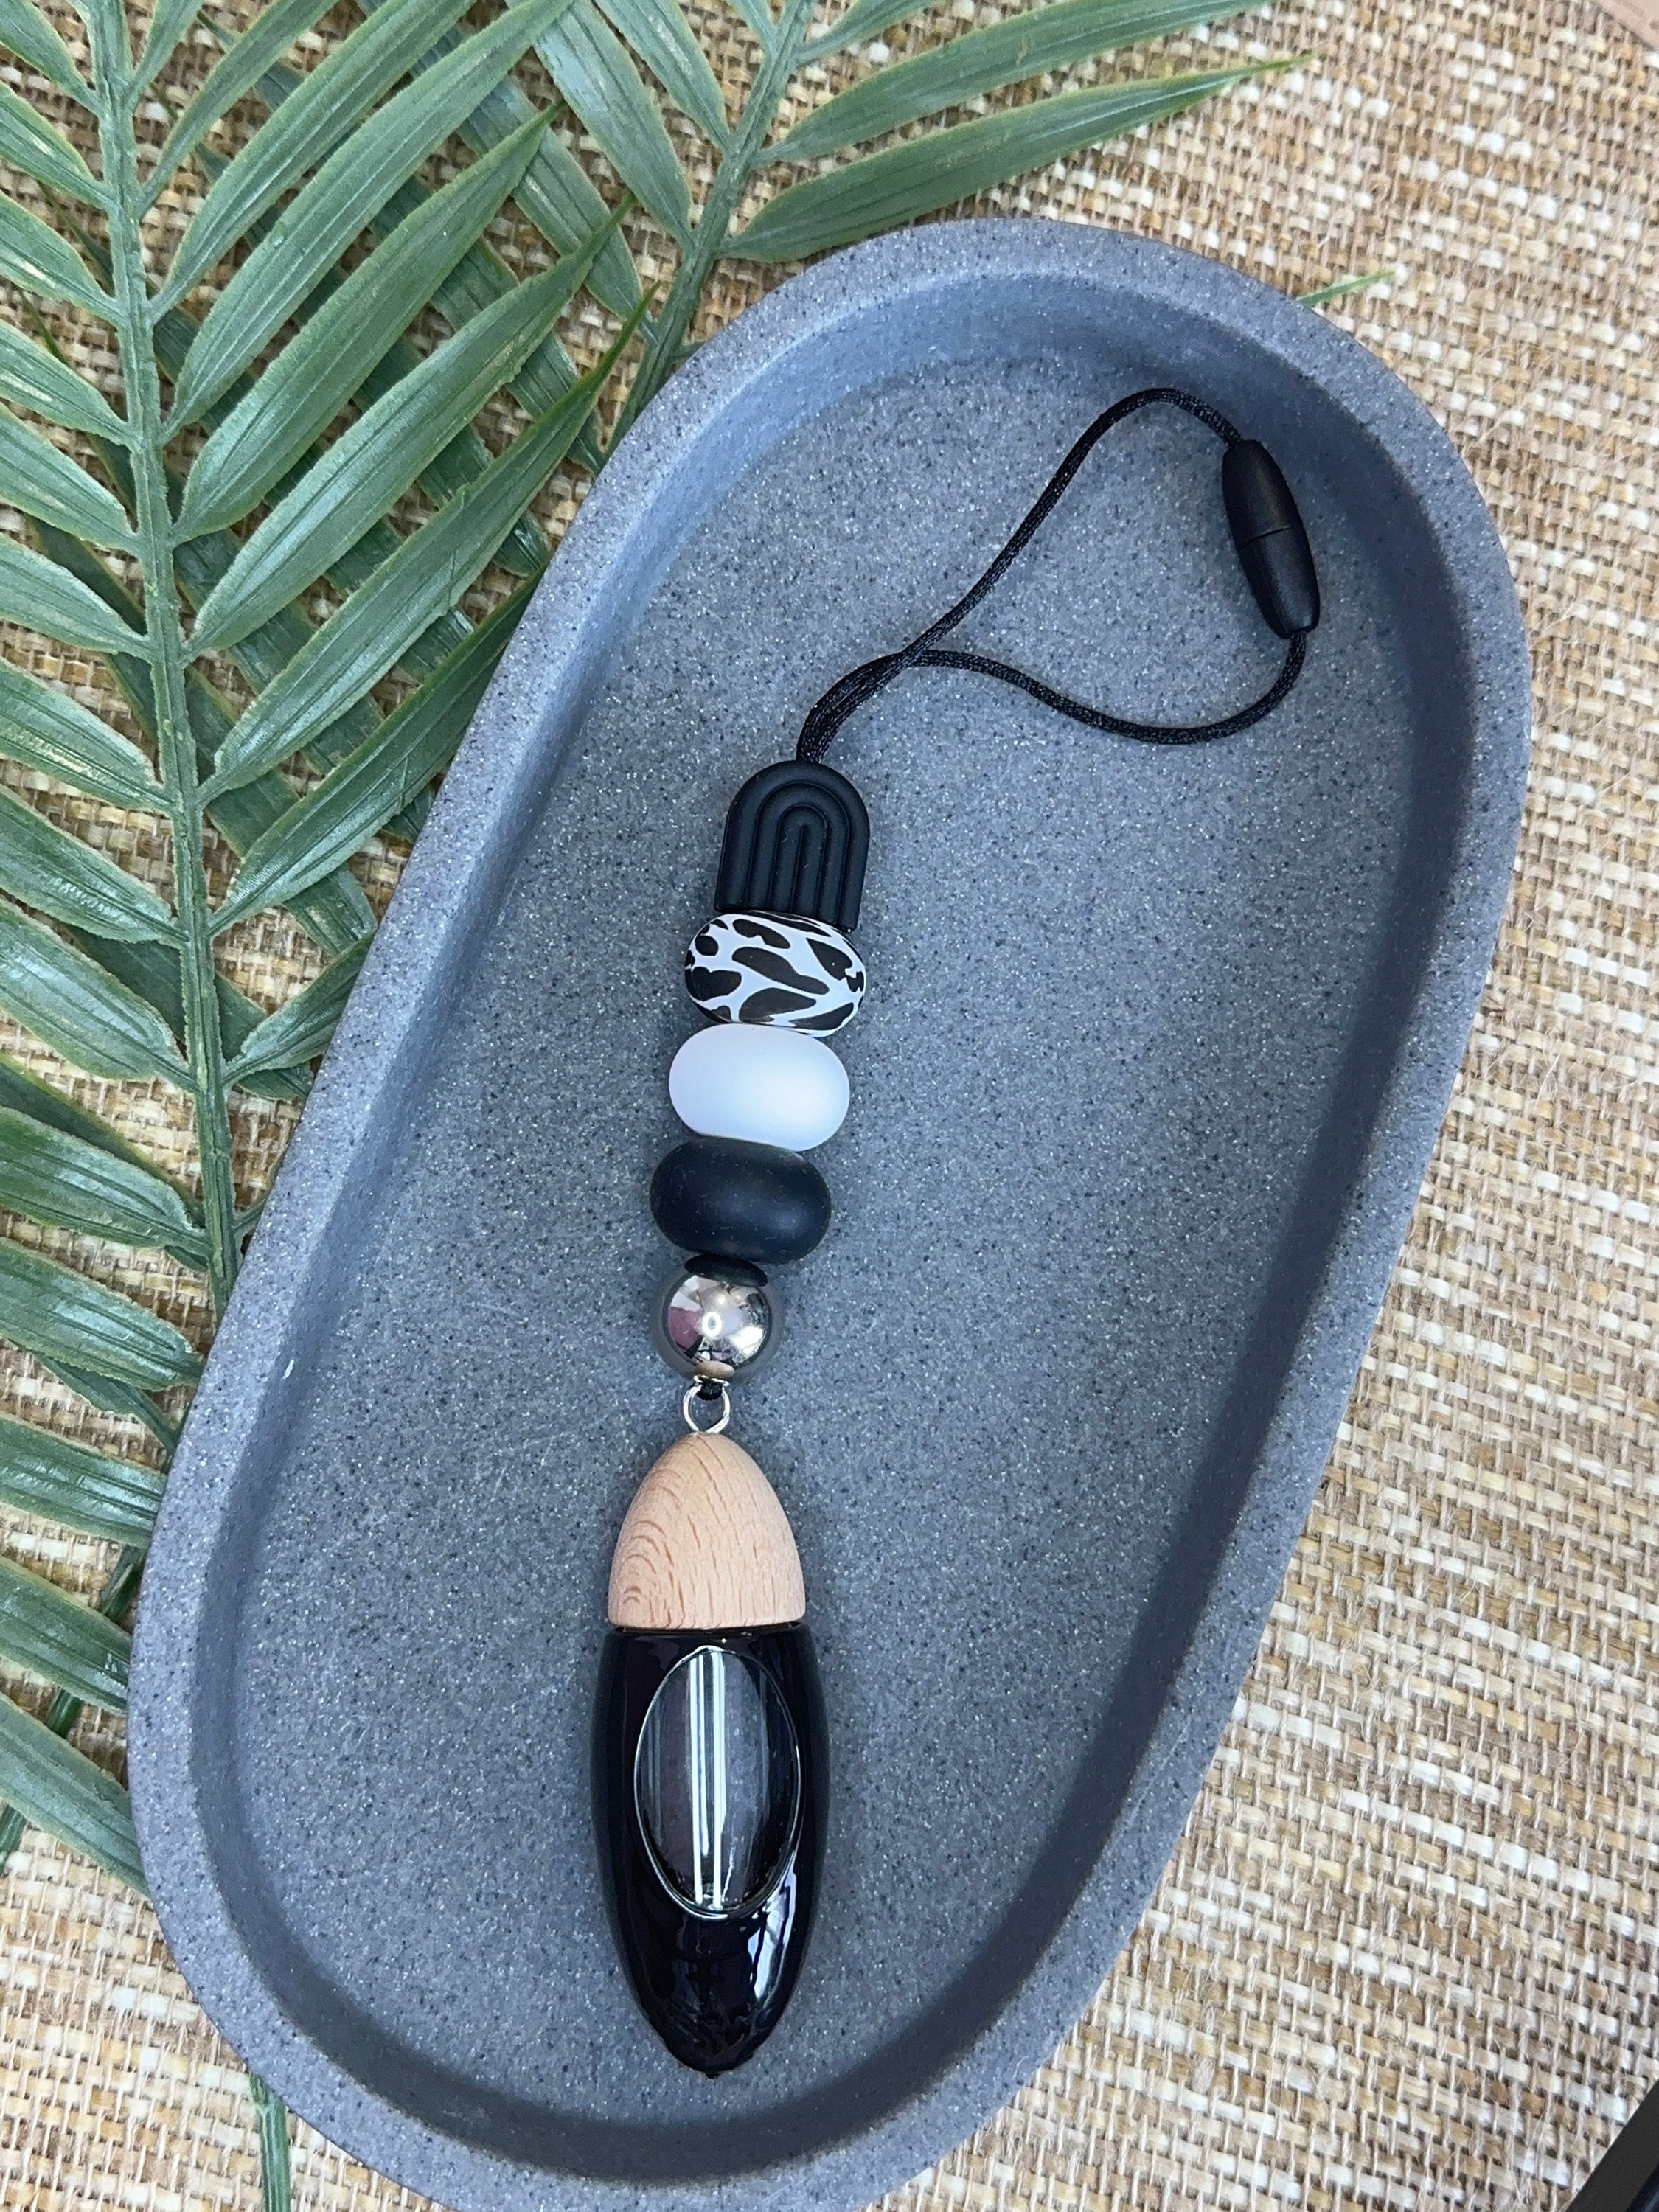  Essential Oil Diffuser for Car, Automobile Hanging Evil Eye Aromatherapy  Diffuser Cage Pendant with Scent Pad, Aroma Diffusers for Essential Oils,  Small Car Diffuser Locket Charms for Anxiety Relief : Automotive